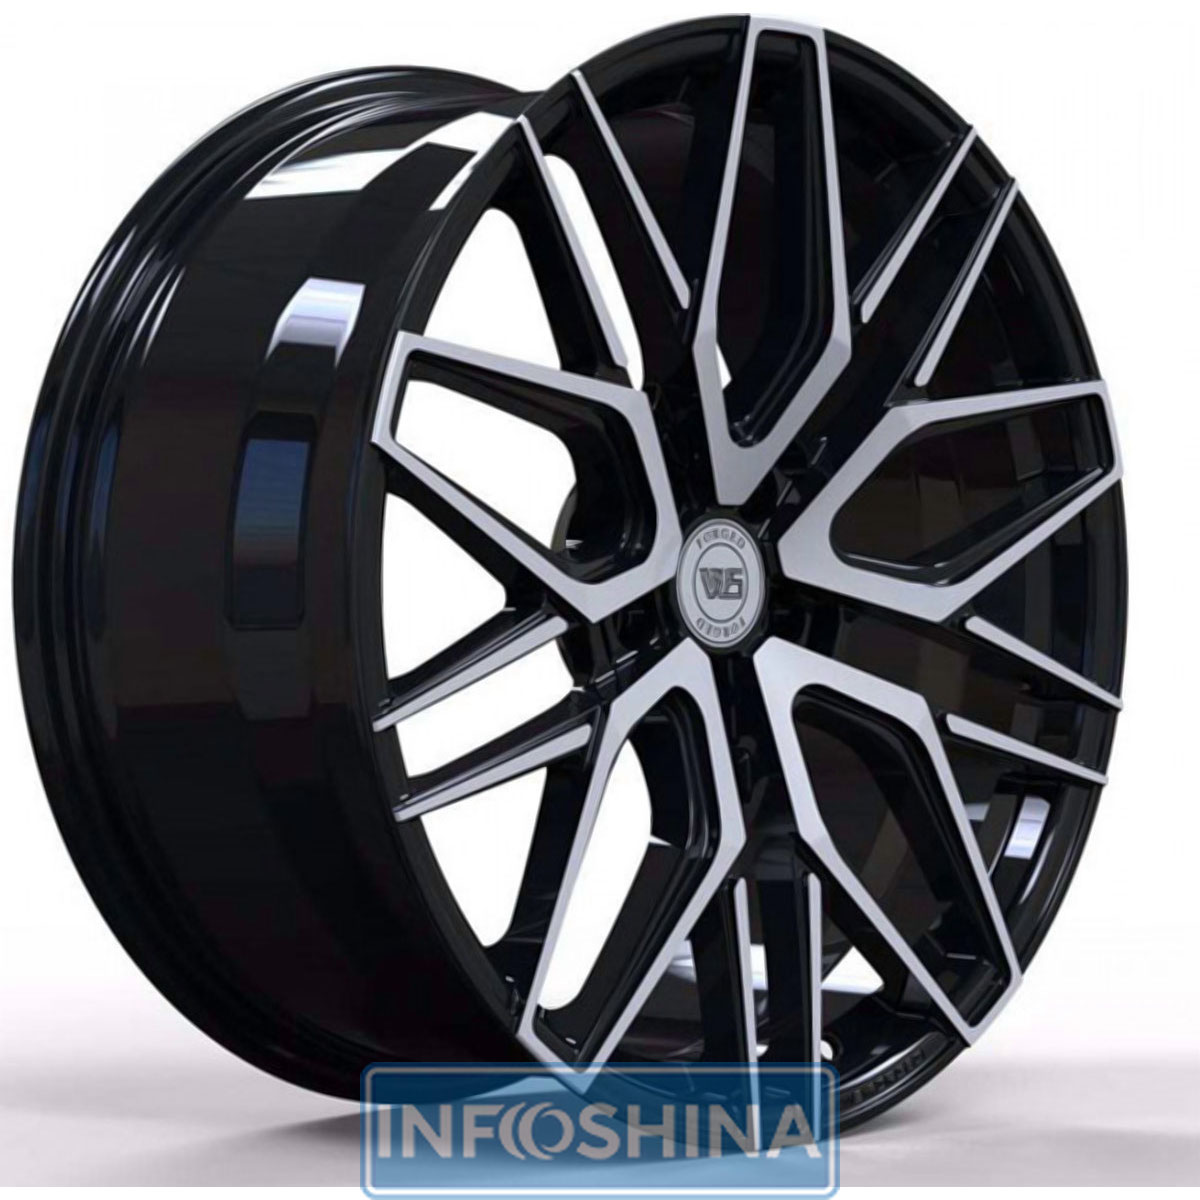 Купить диски WS Forged WS1281 Gloss Black With Machined Face R20 W10.5 PCD5x112 ET40 DIA66.5